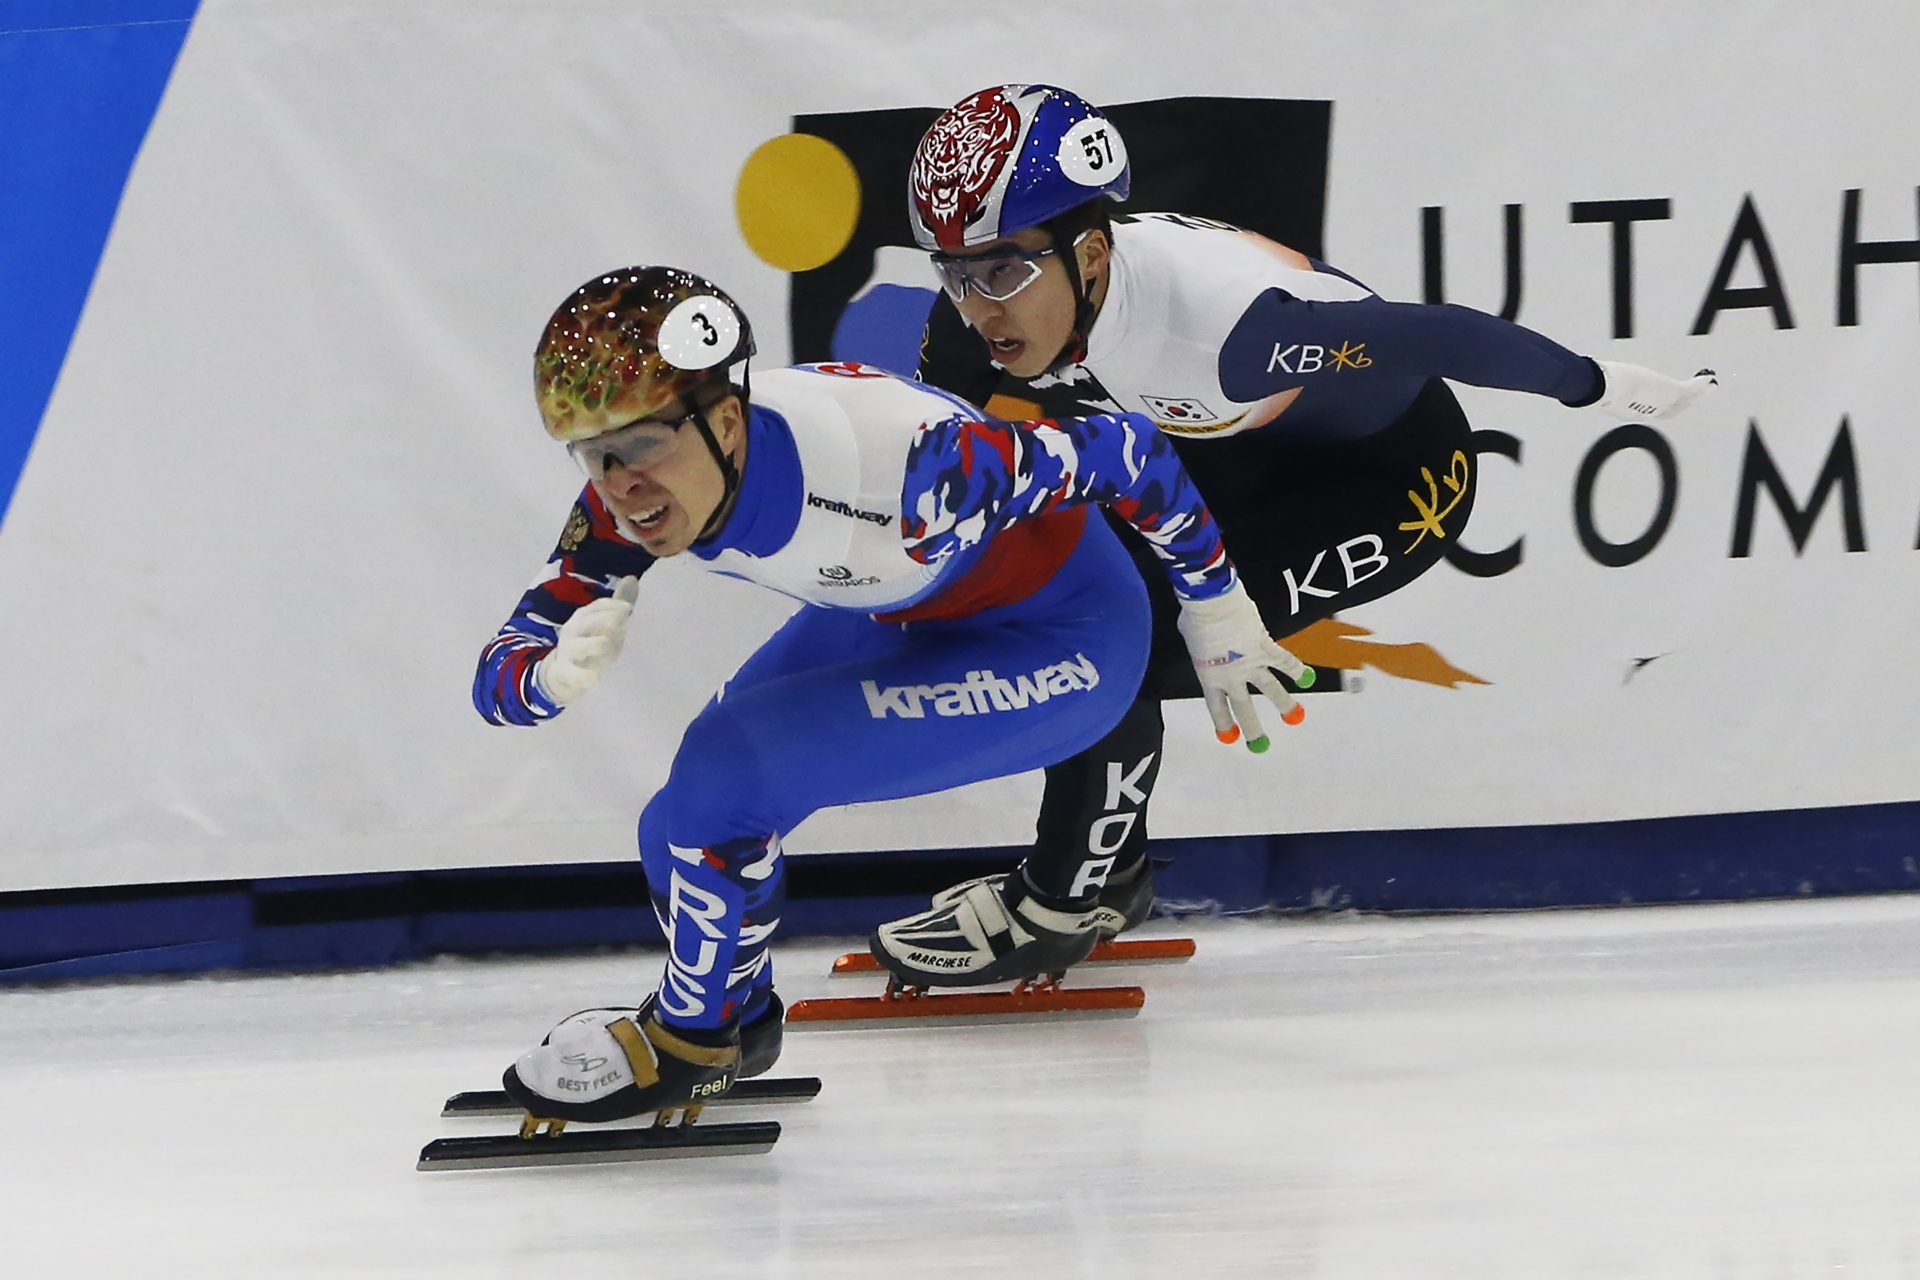 Russia's Semen Elistratov, left, competes with South Korea's Park Ji Won, right during the finals of the men's 5000 meter relay at a World Cup short track speed-skating event at the Utah Olympic Oval on Sunday, Nov. 3, 2019, in Kearns, Utah.